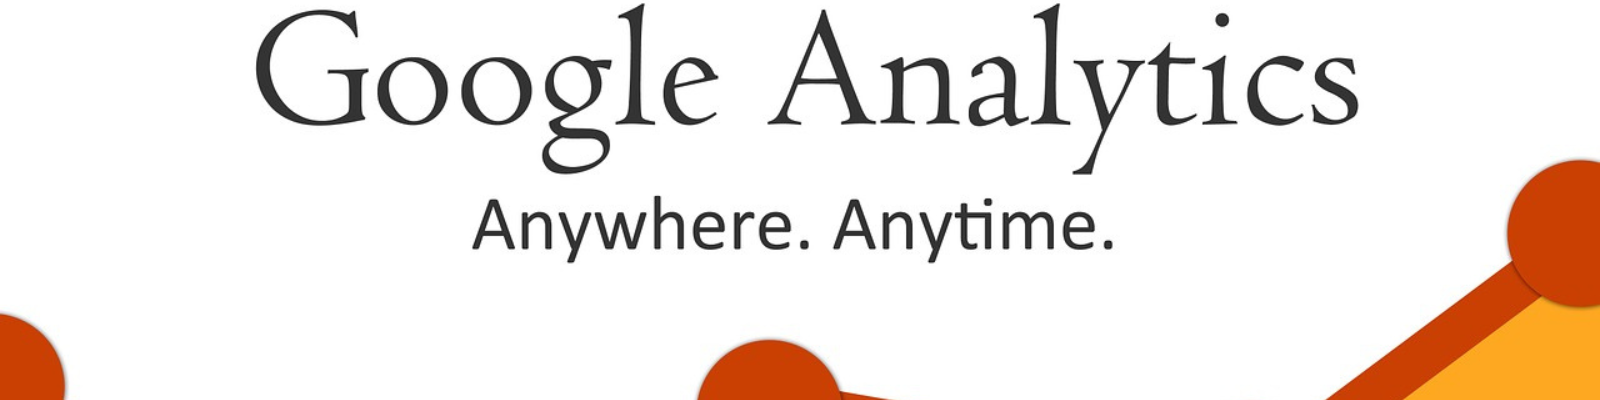 Google Analytics Data and What It Means